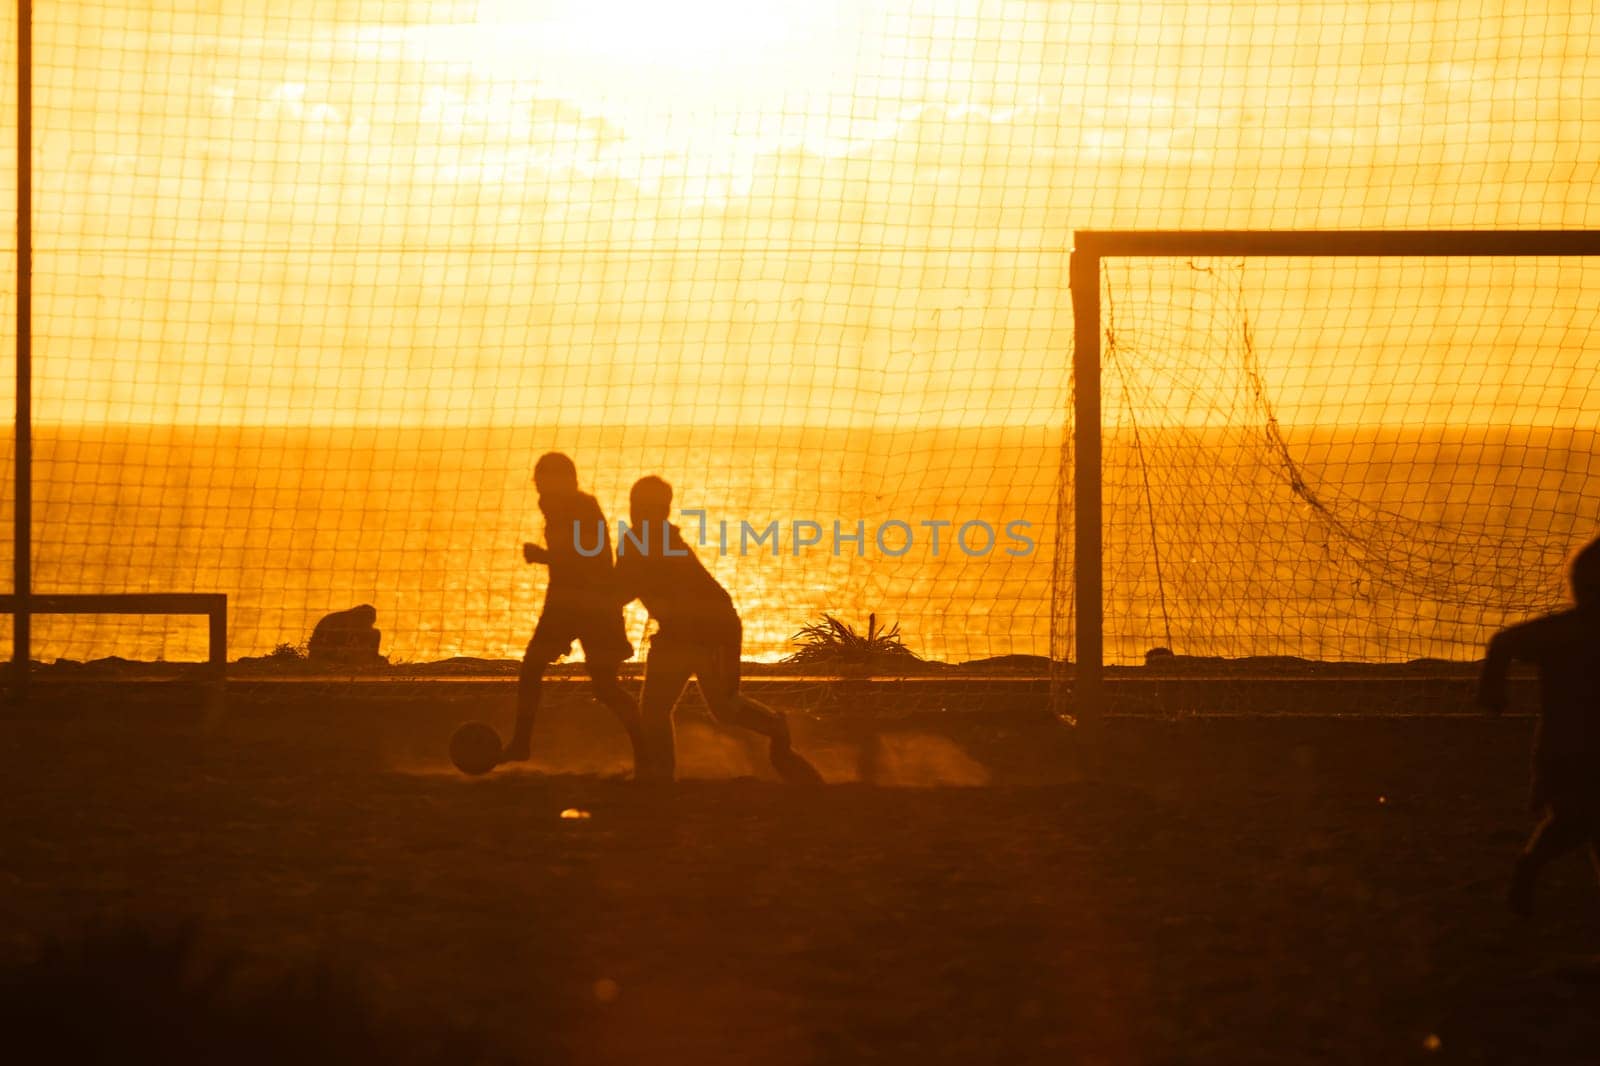 A couple of people standing next to a soccer goal